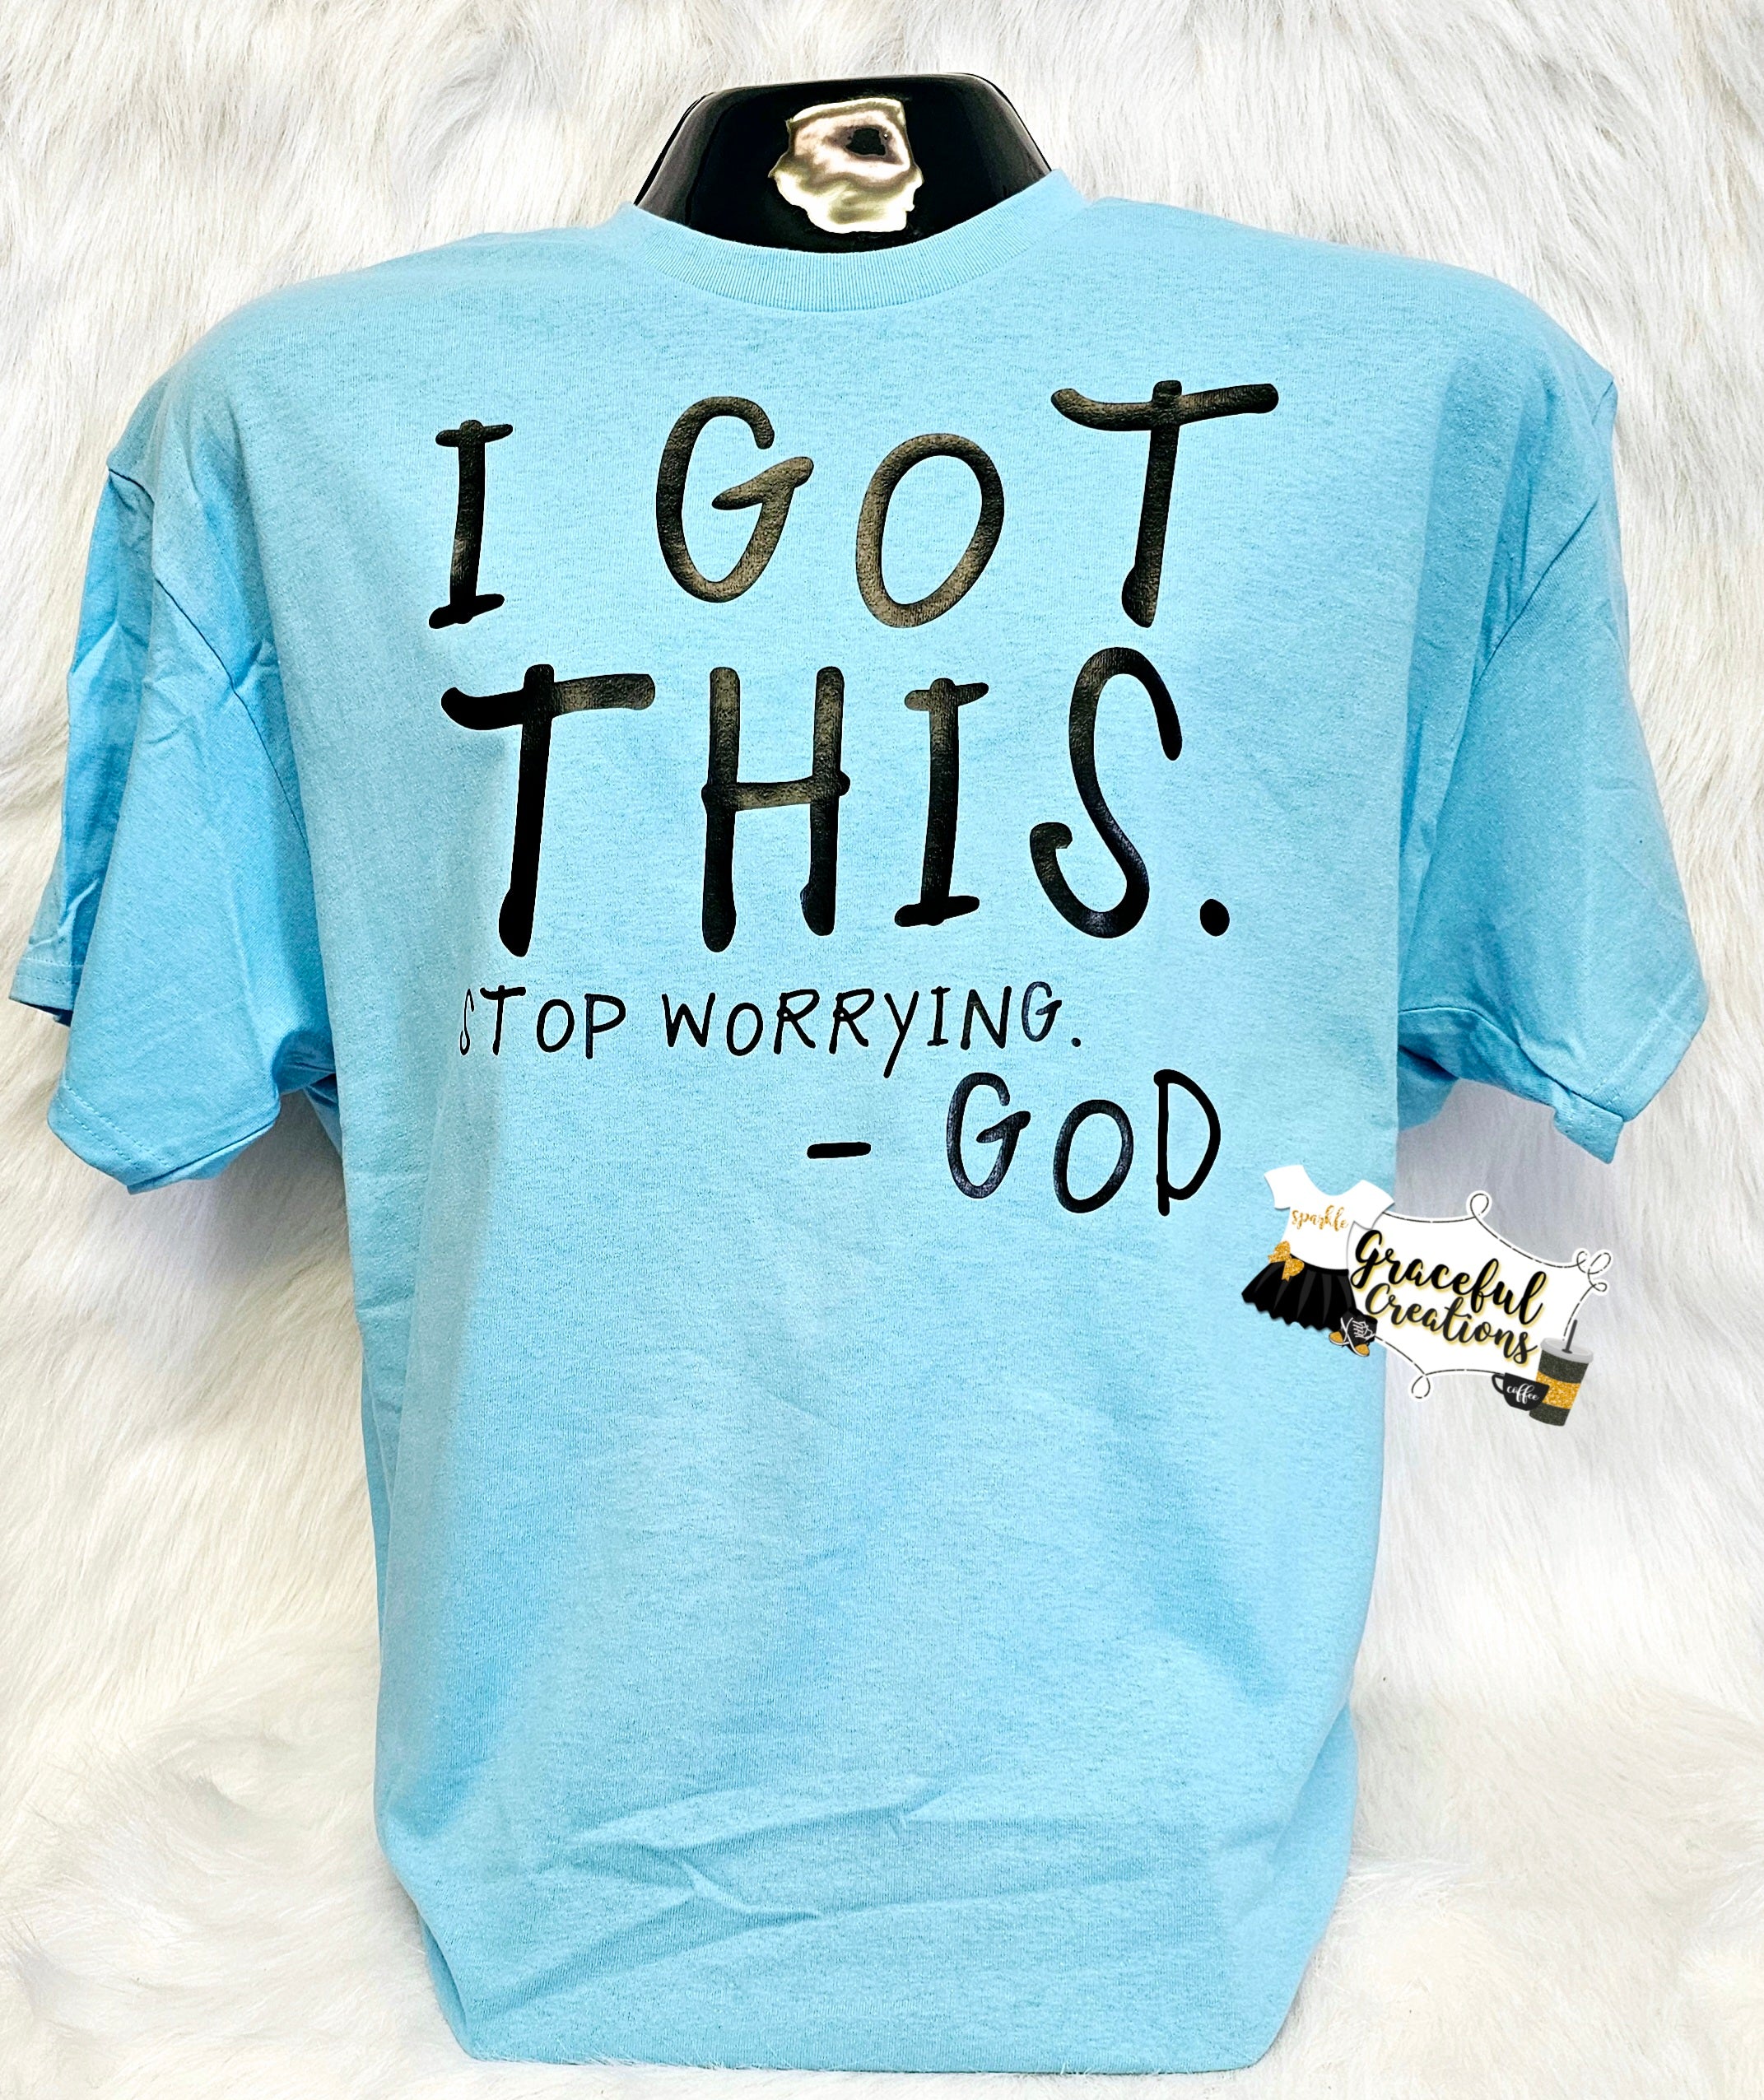 I Got This. Stop Worrying. - God